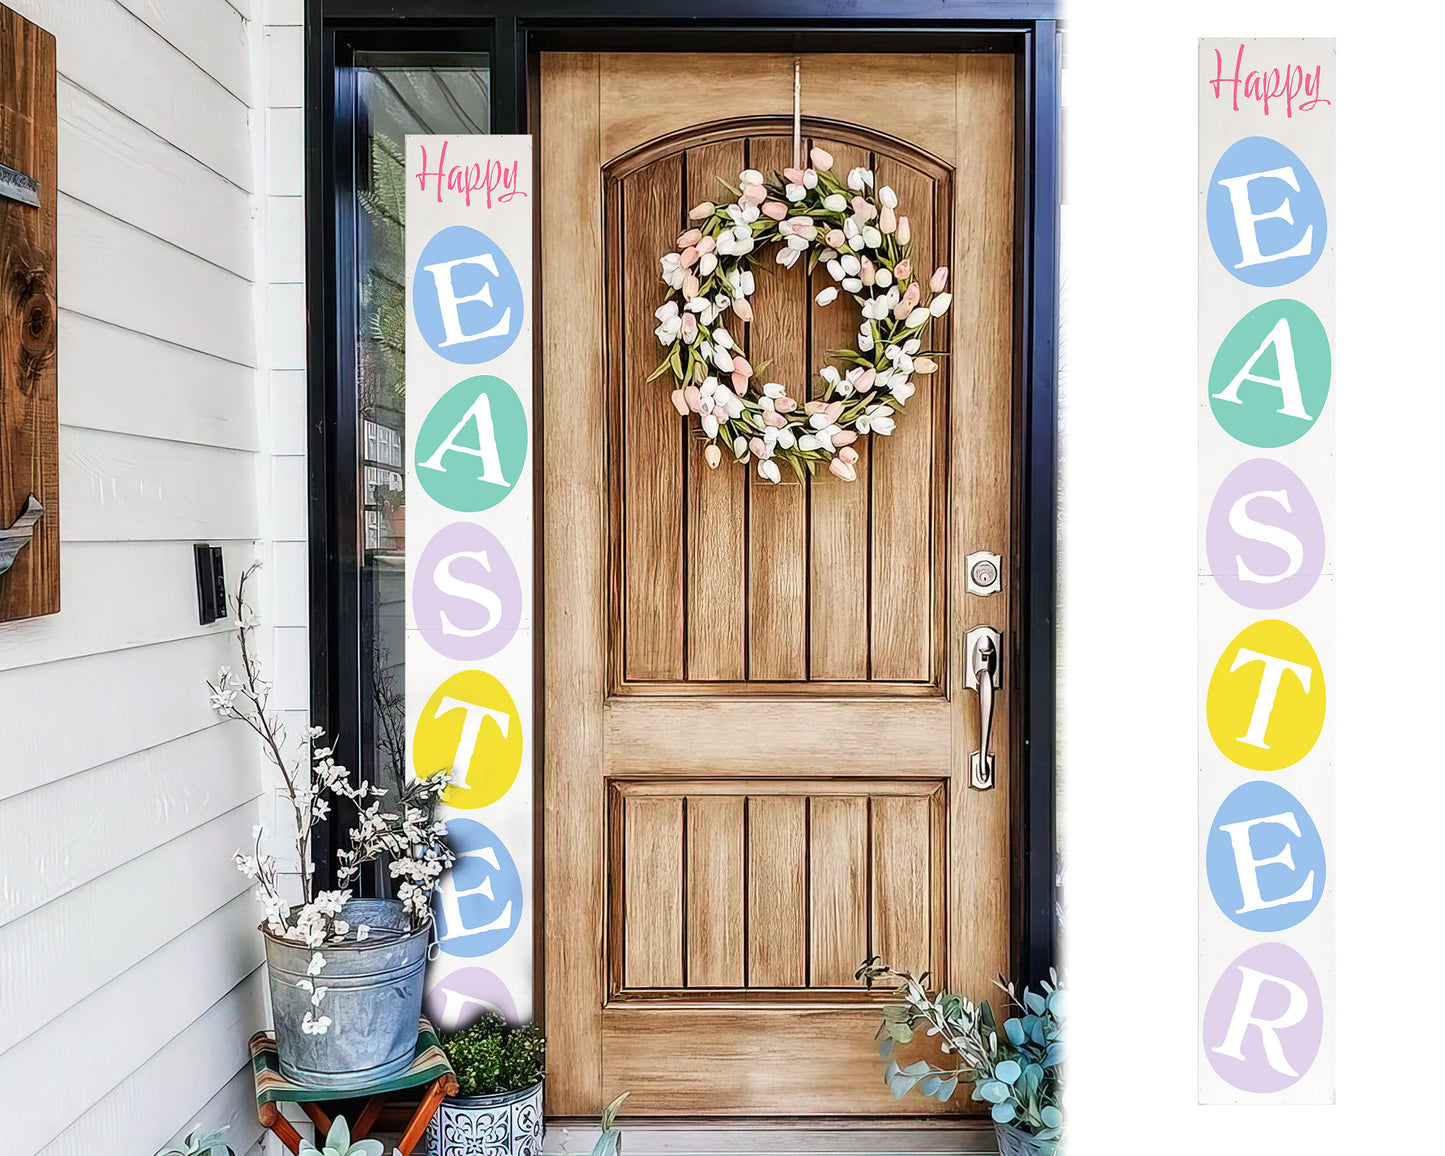 72in Happy Easter Porch Sign - Easter Decor Sign, Home Front Door Yard Party Decor, Folding Sign, Rustic Farmhouse Party De